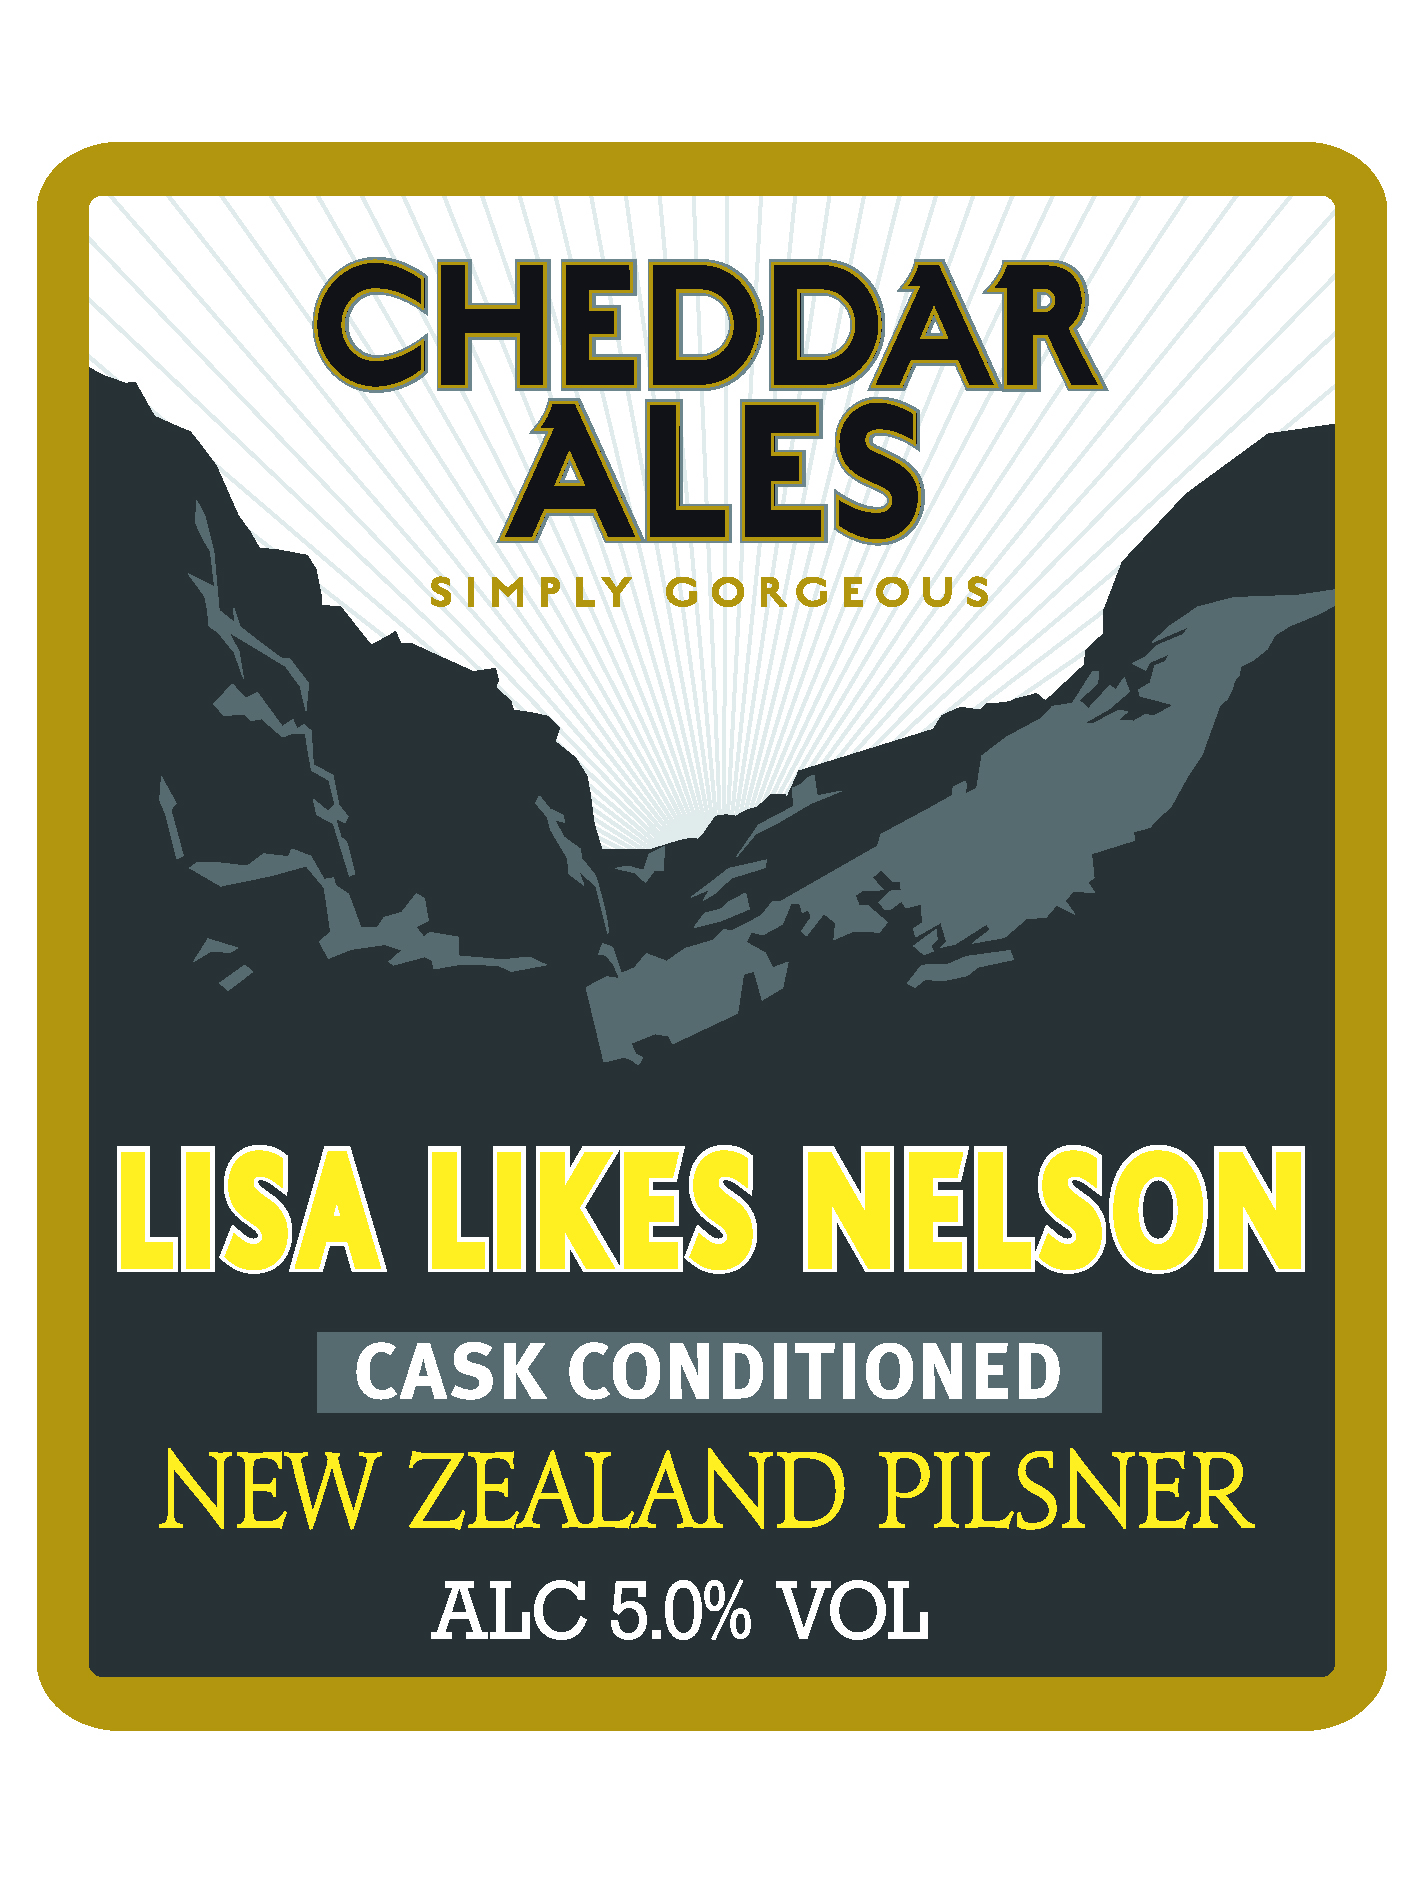 Lisa Likes Nelson - Cheddar Ales